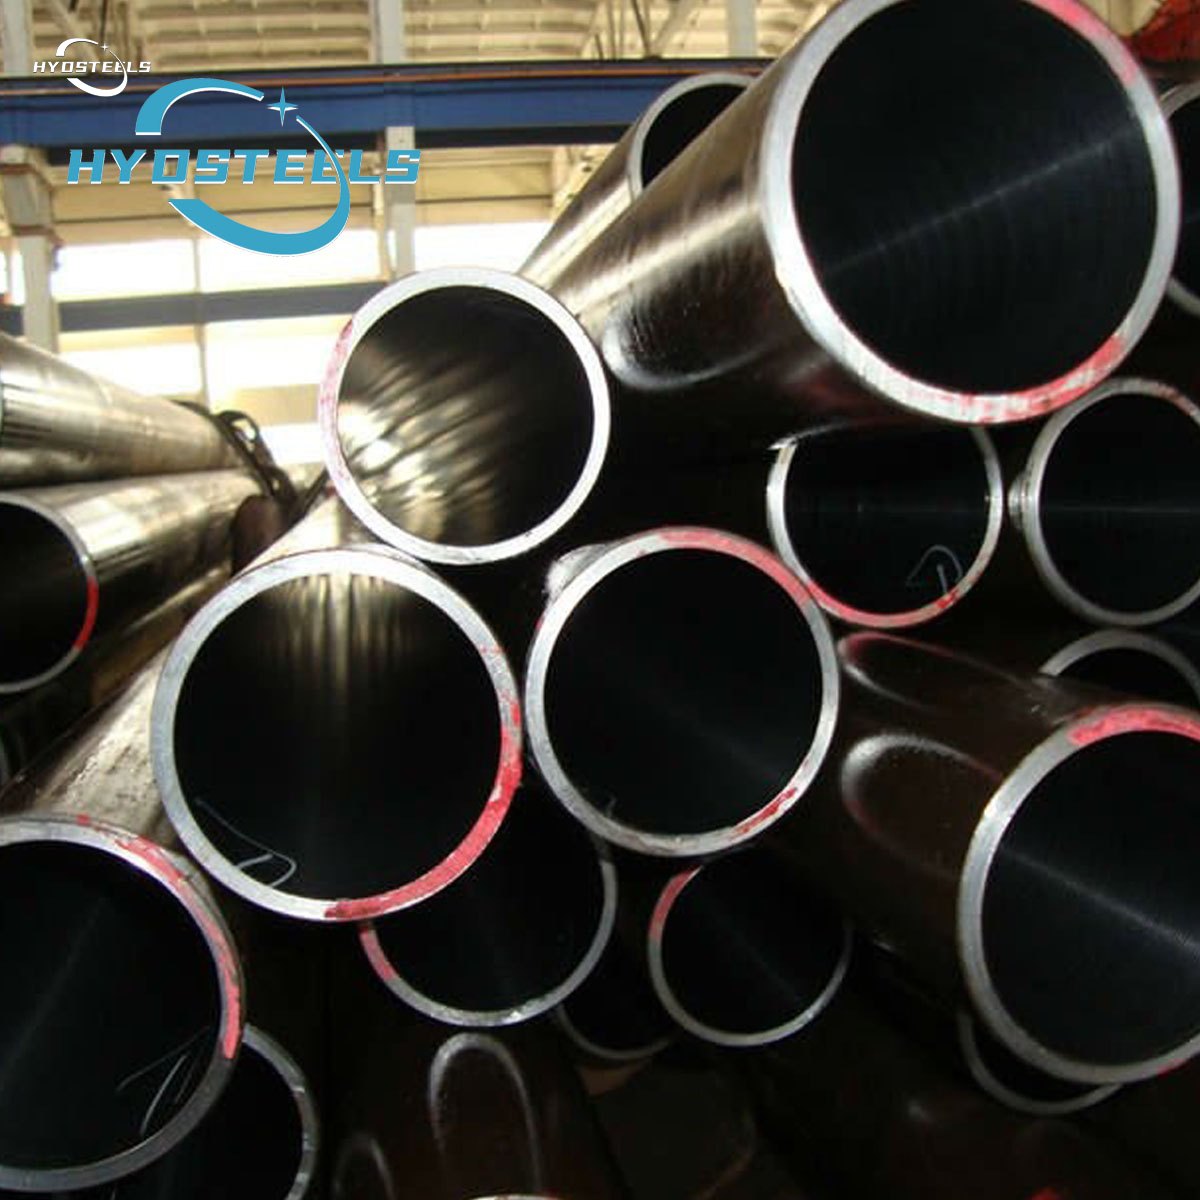 St52 BKS Steel Honed Tube for Hydraulic Cylinder Tube China Supplier